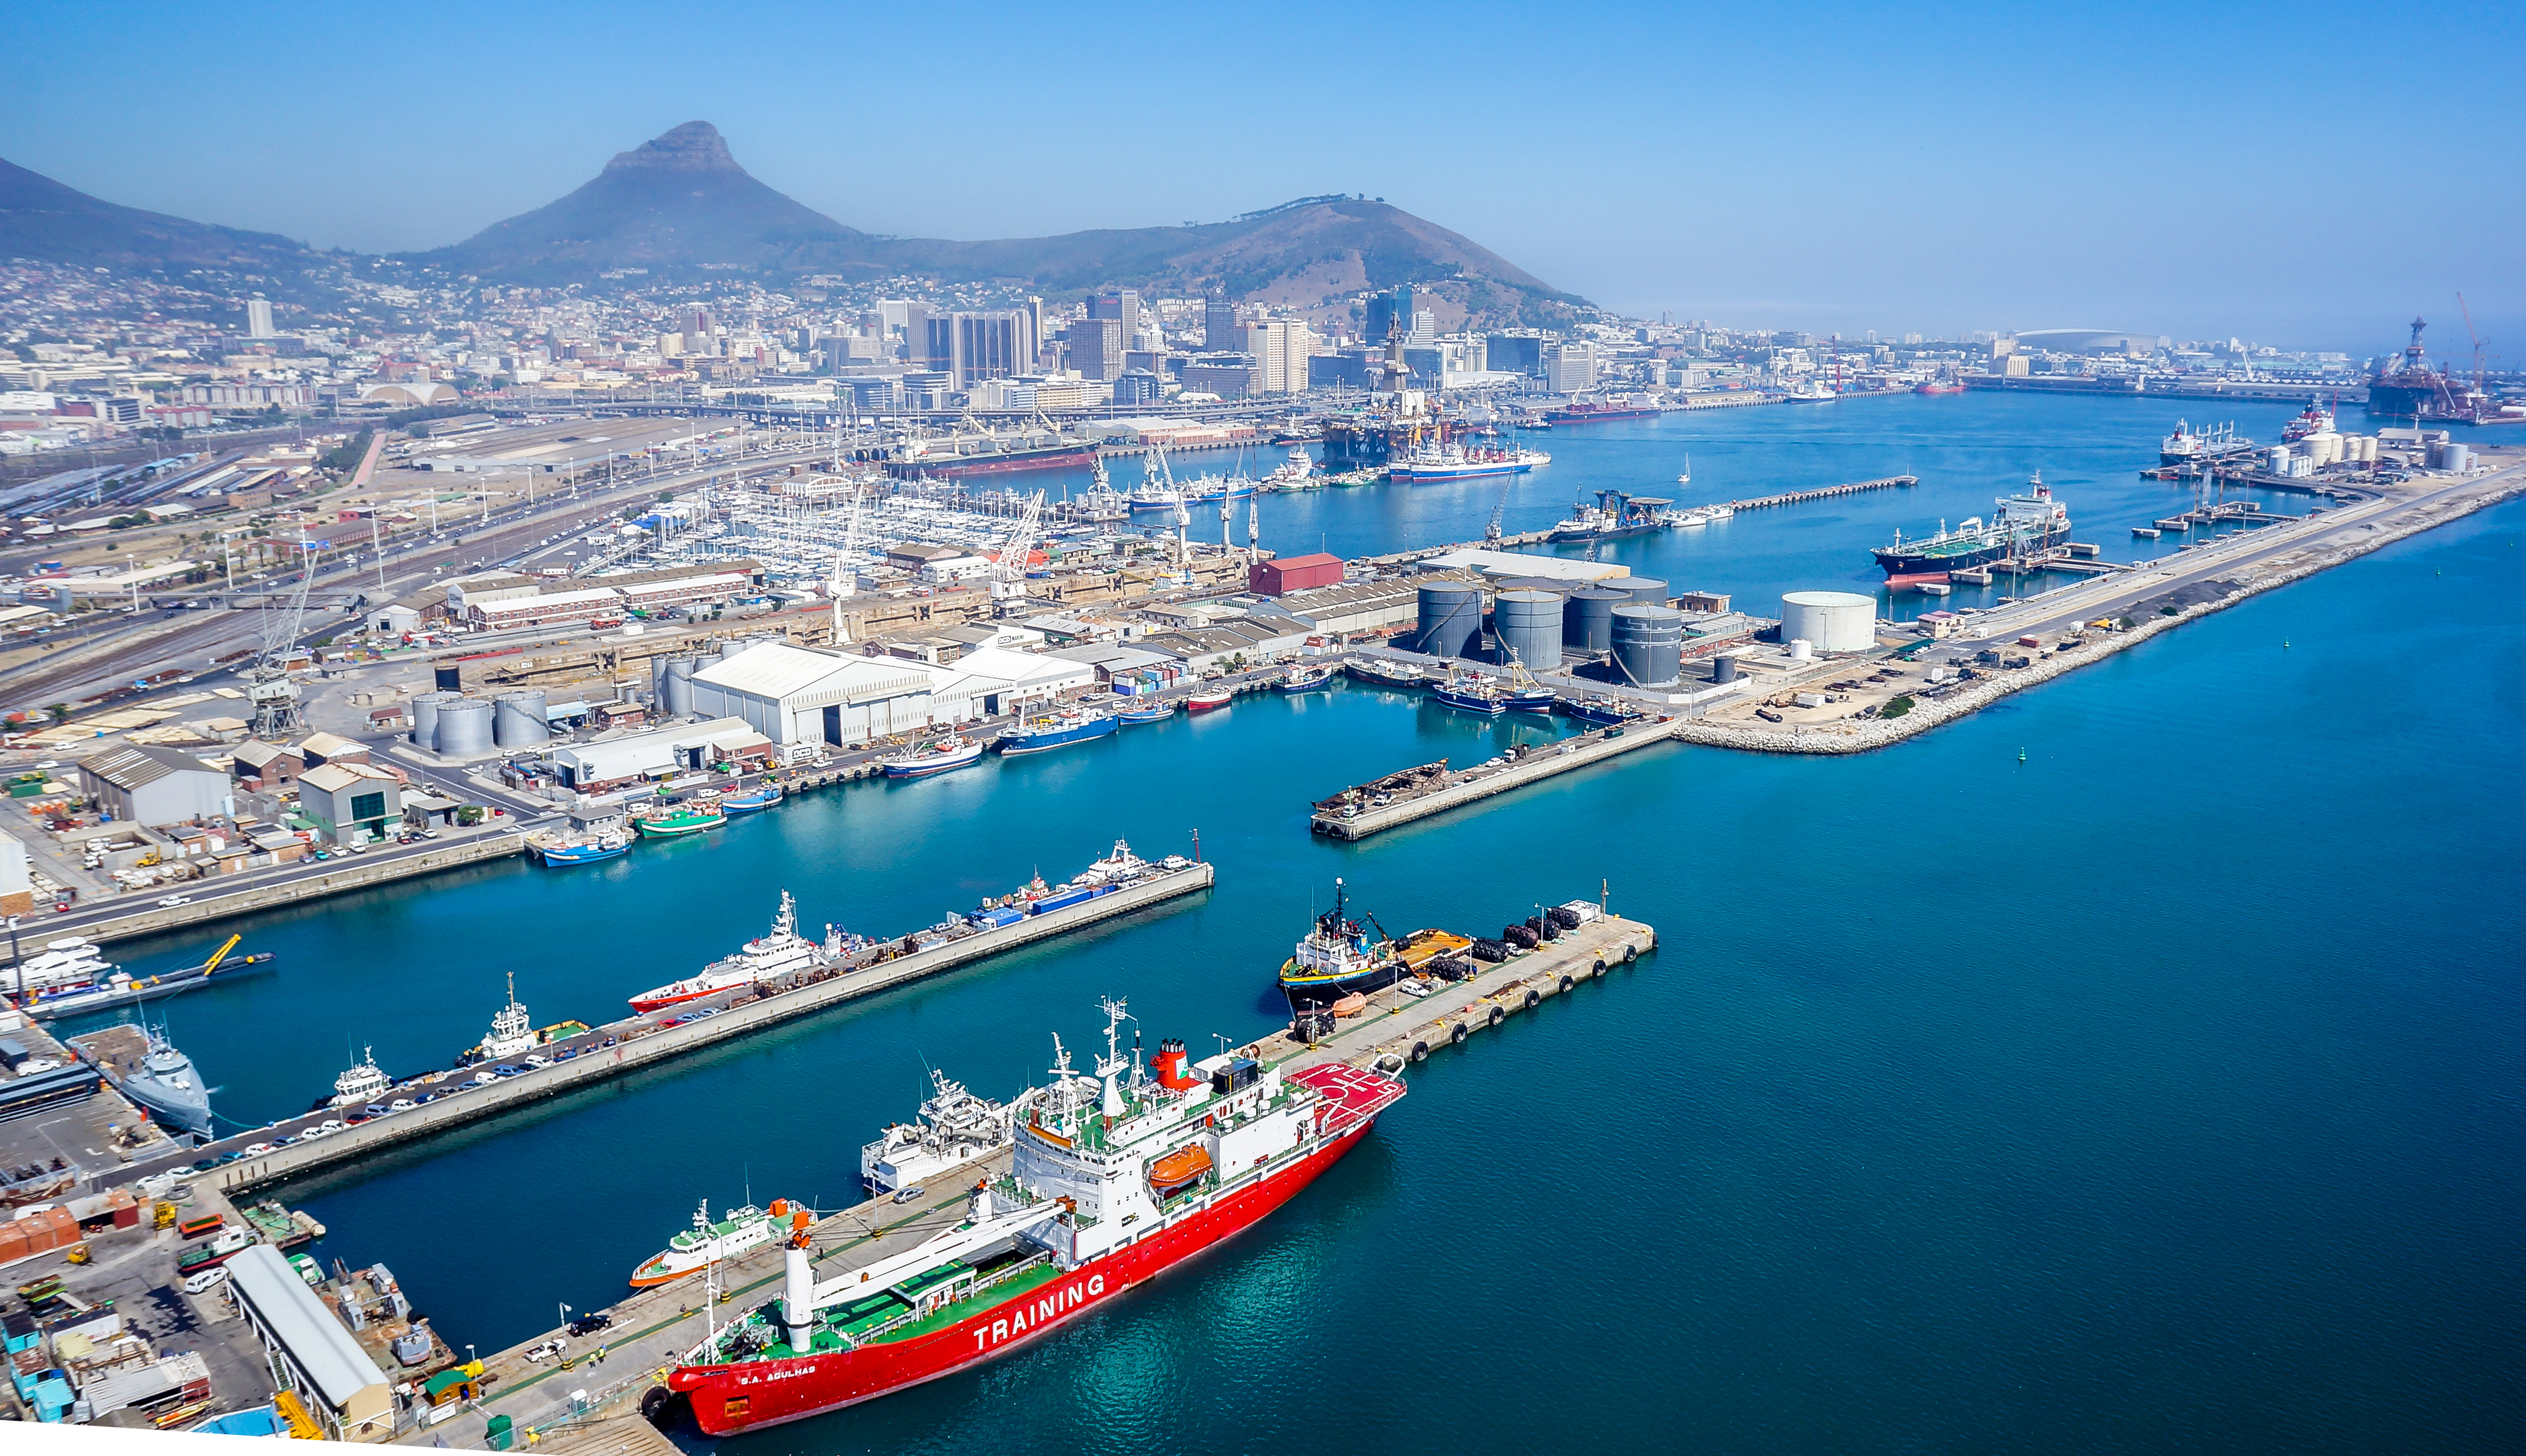 File:Port of Cape Town.jpg - Wikimedia Commons